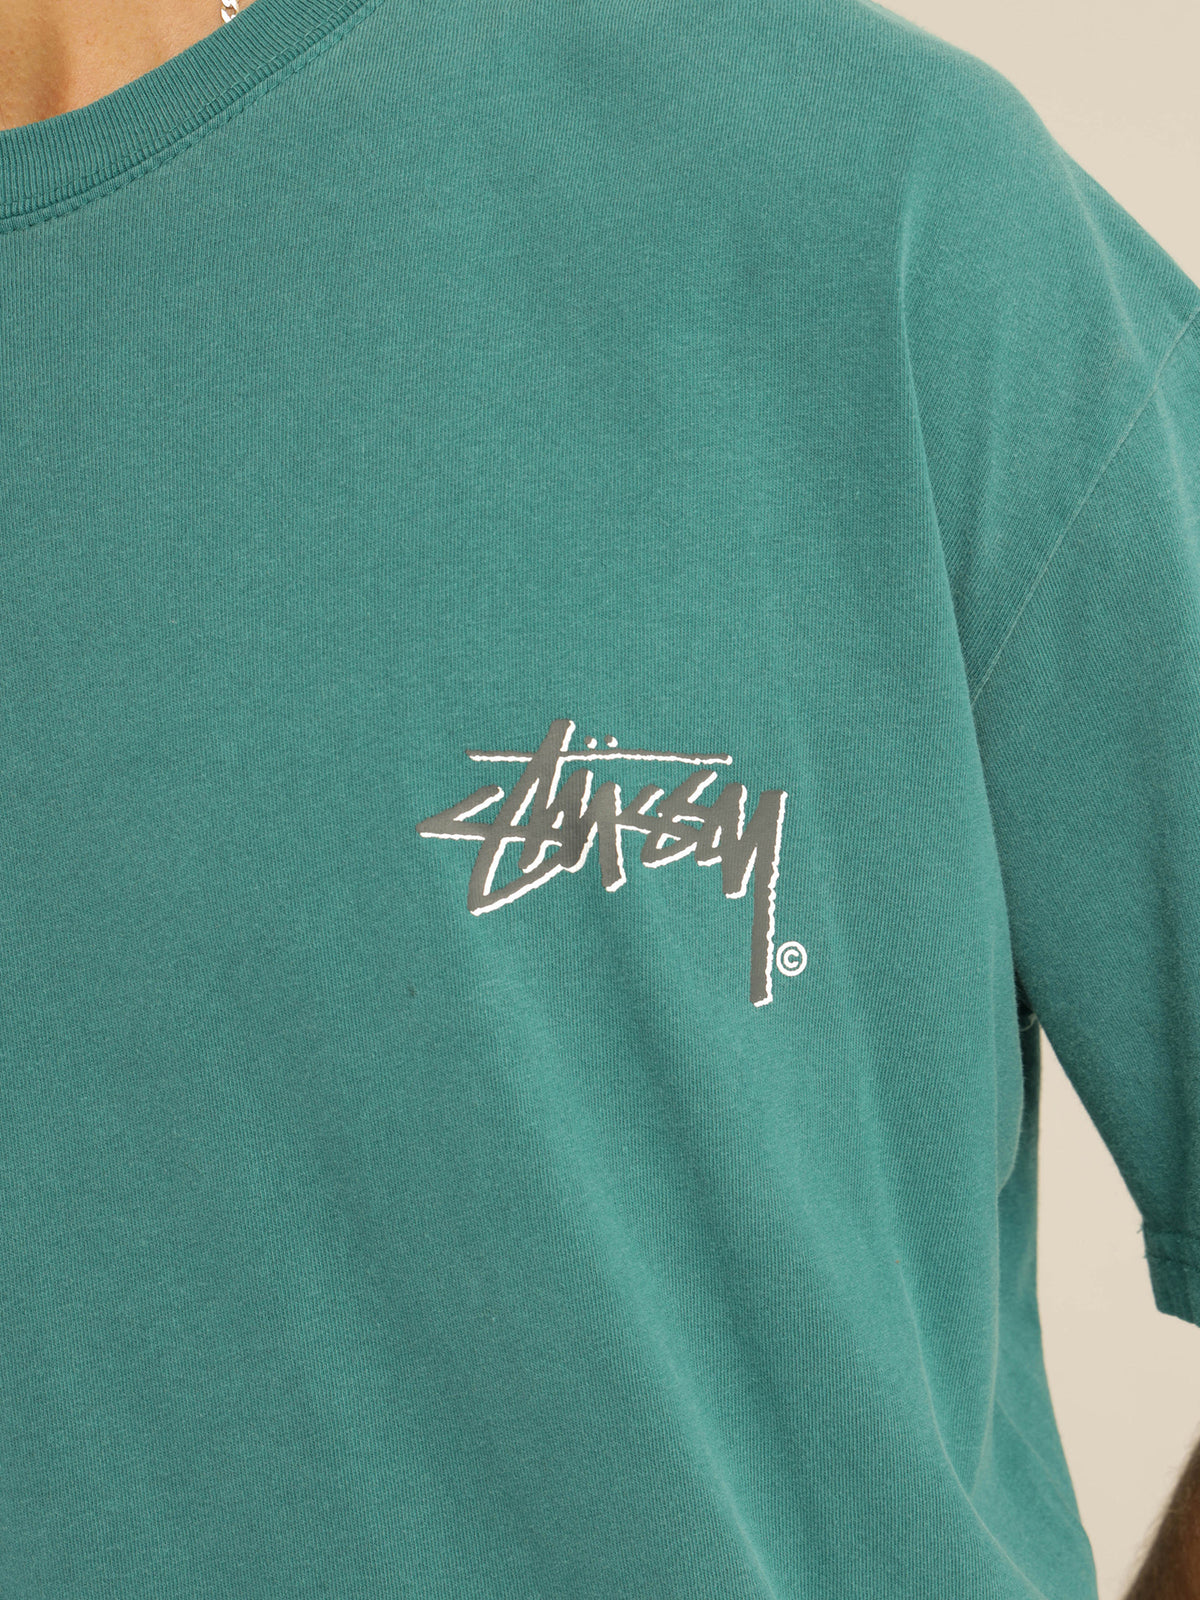 Shadow Stock T-Shirt in Pigment Teal